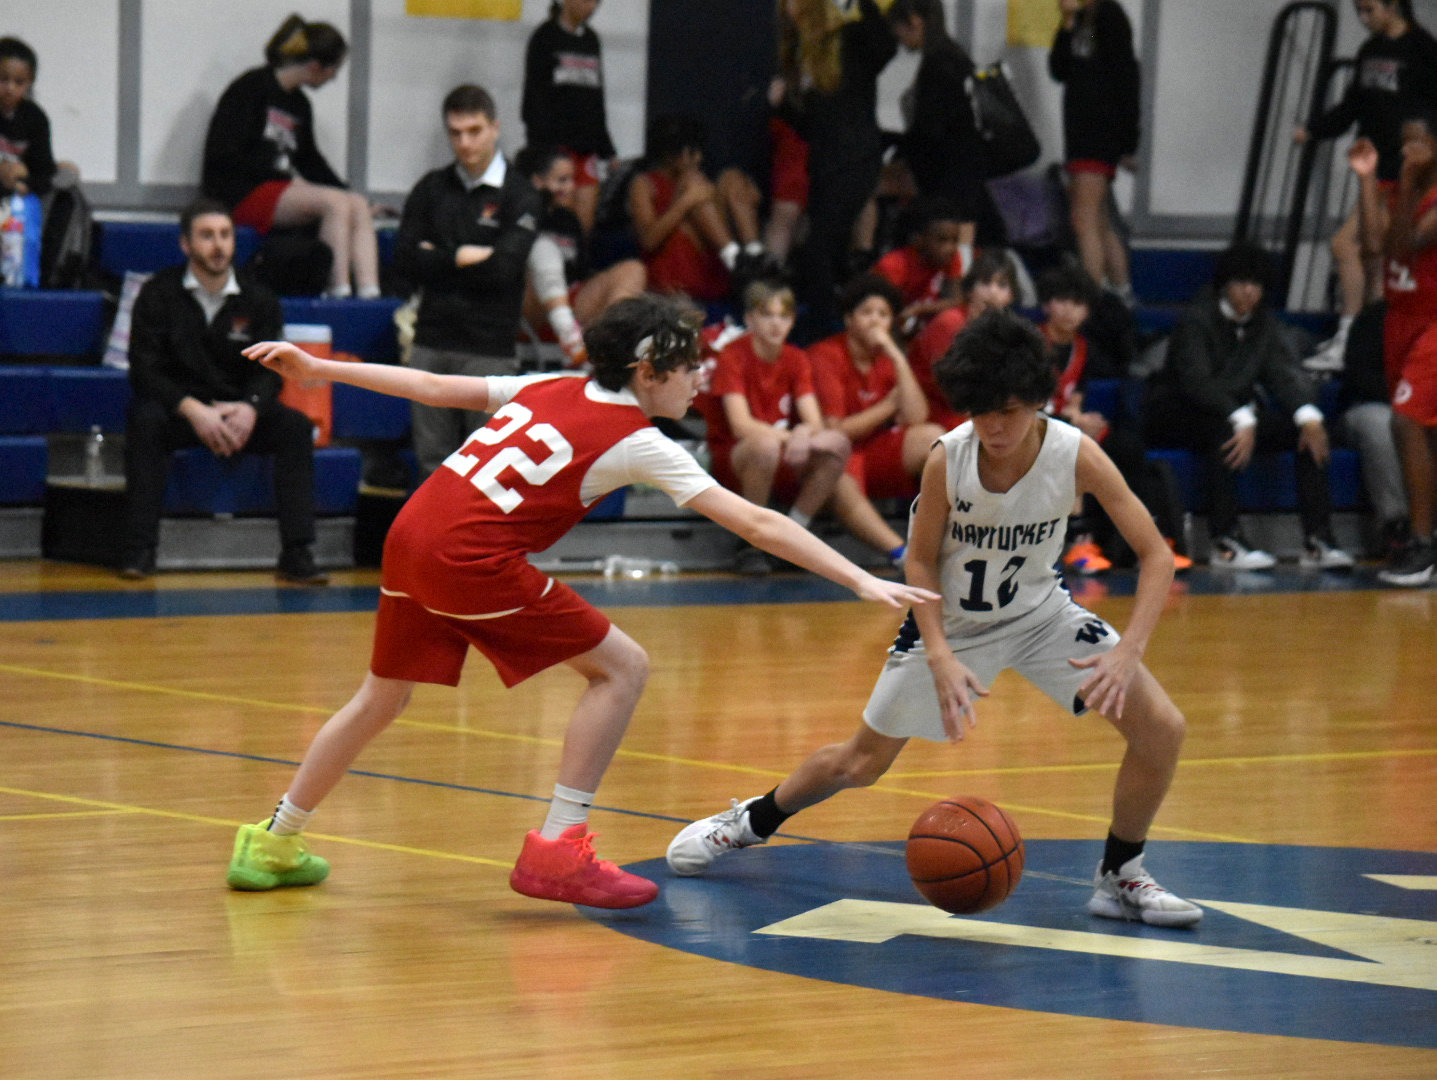 Joao Silva Gualburto dribbles around a Barnstable player during Wednesday's game.